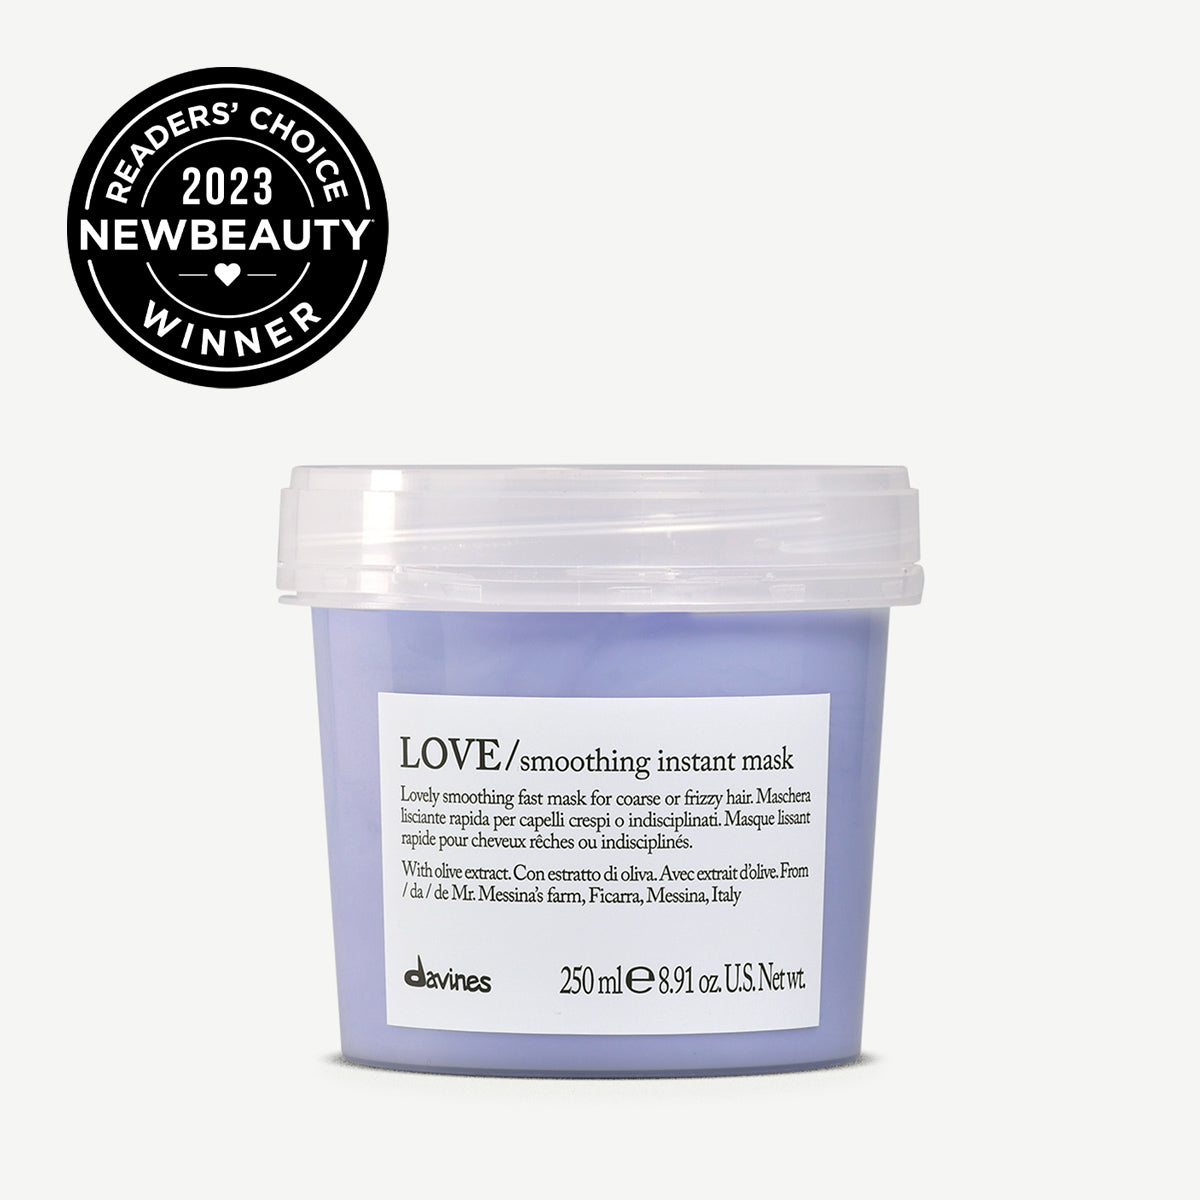 LOVE Smoothing Instant
Mask 1  Davines
